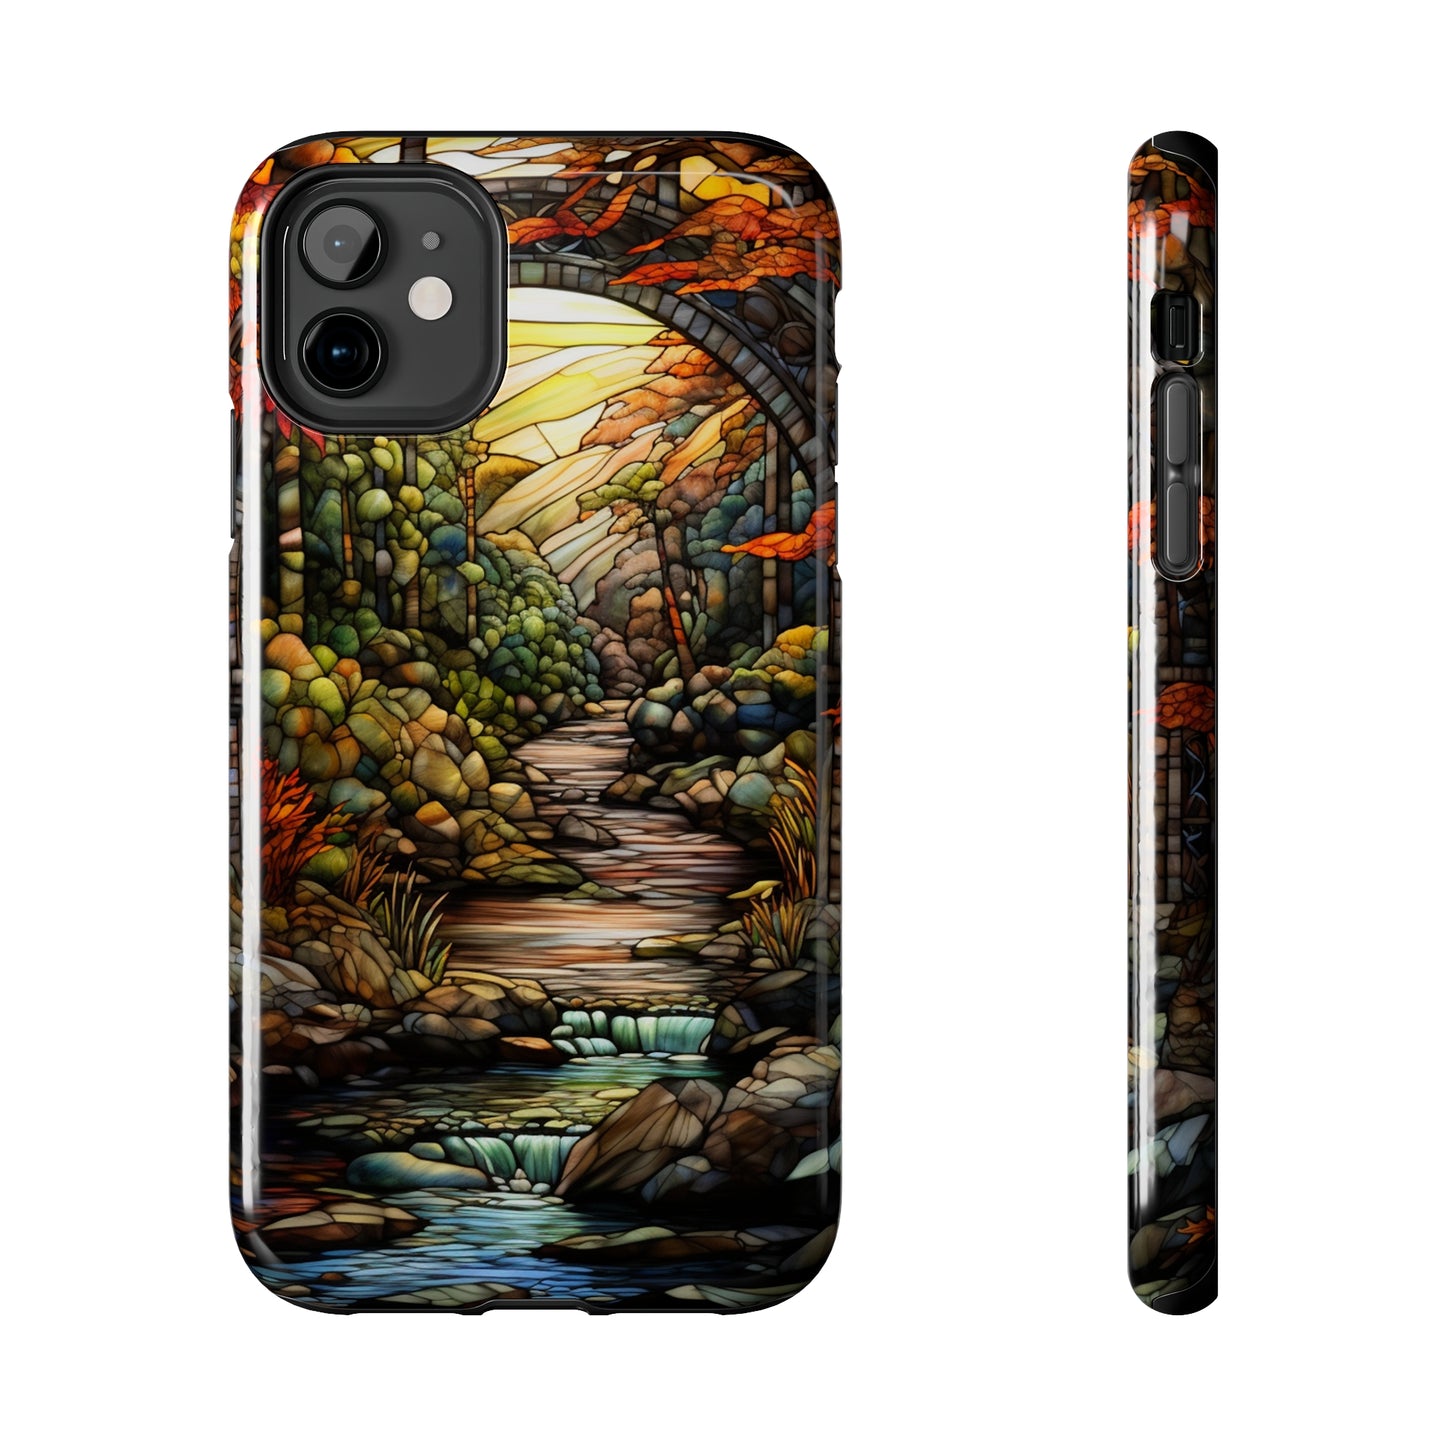 Stained Glass Stone Bridge and River: Floral Art Nouveau Phone Case | Bohemian Elegance for iPhone 14 down to iPhone 7 Models